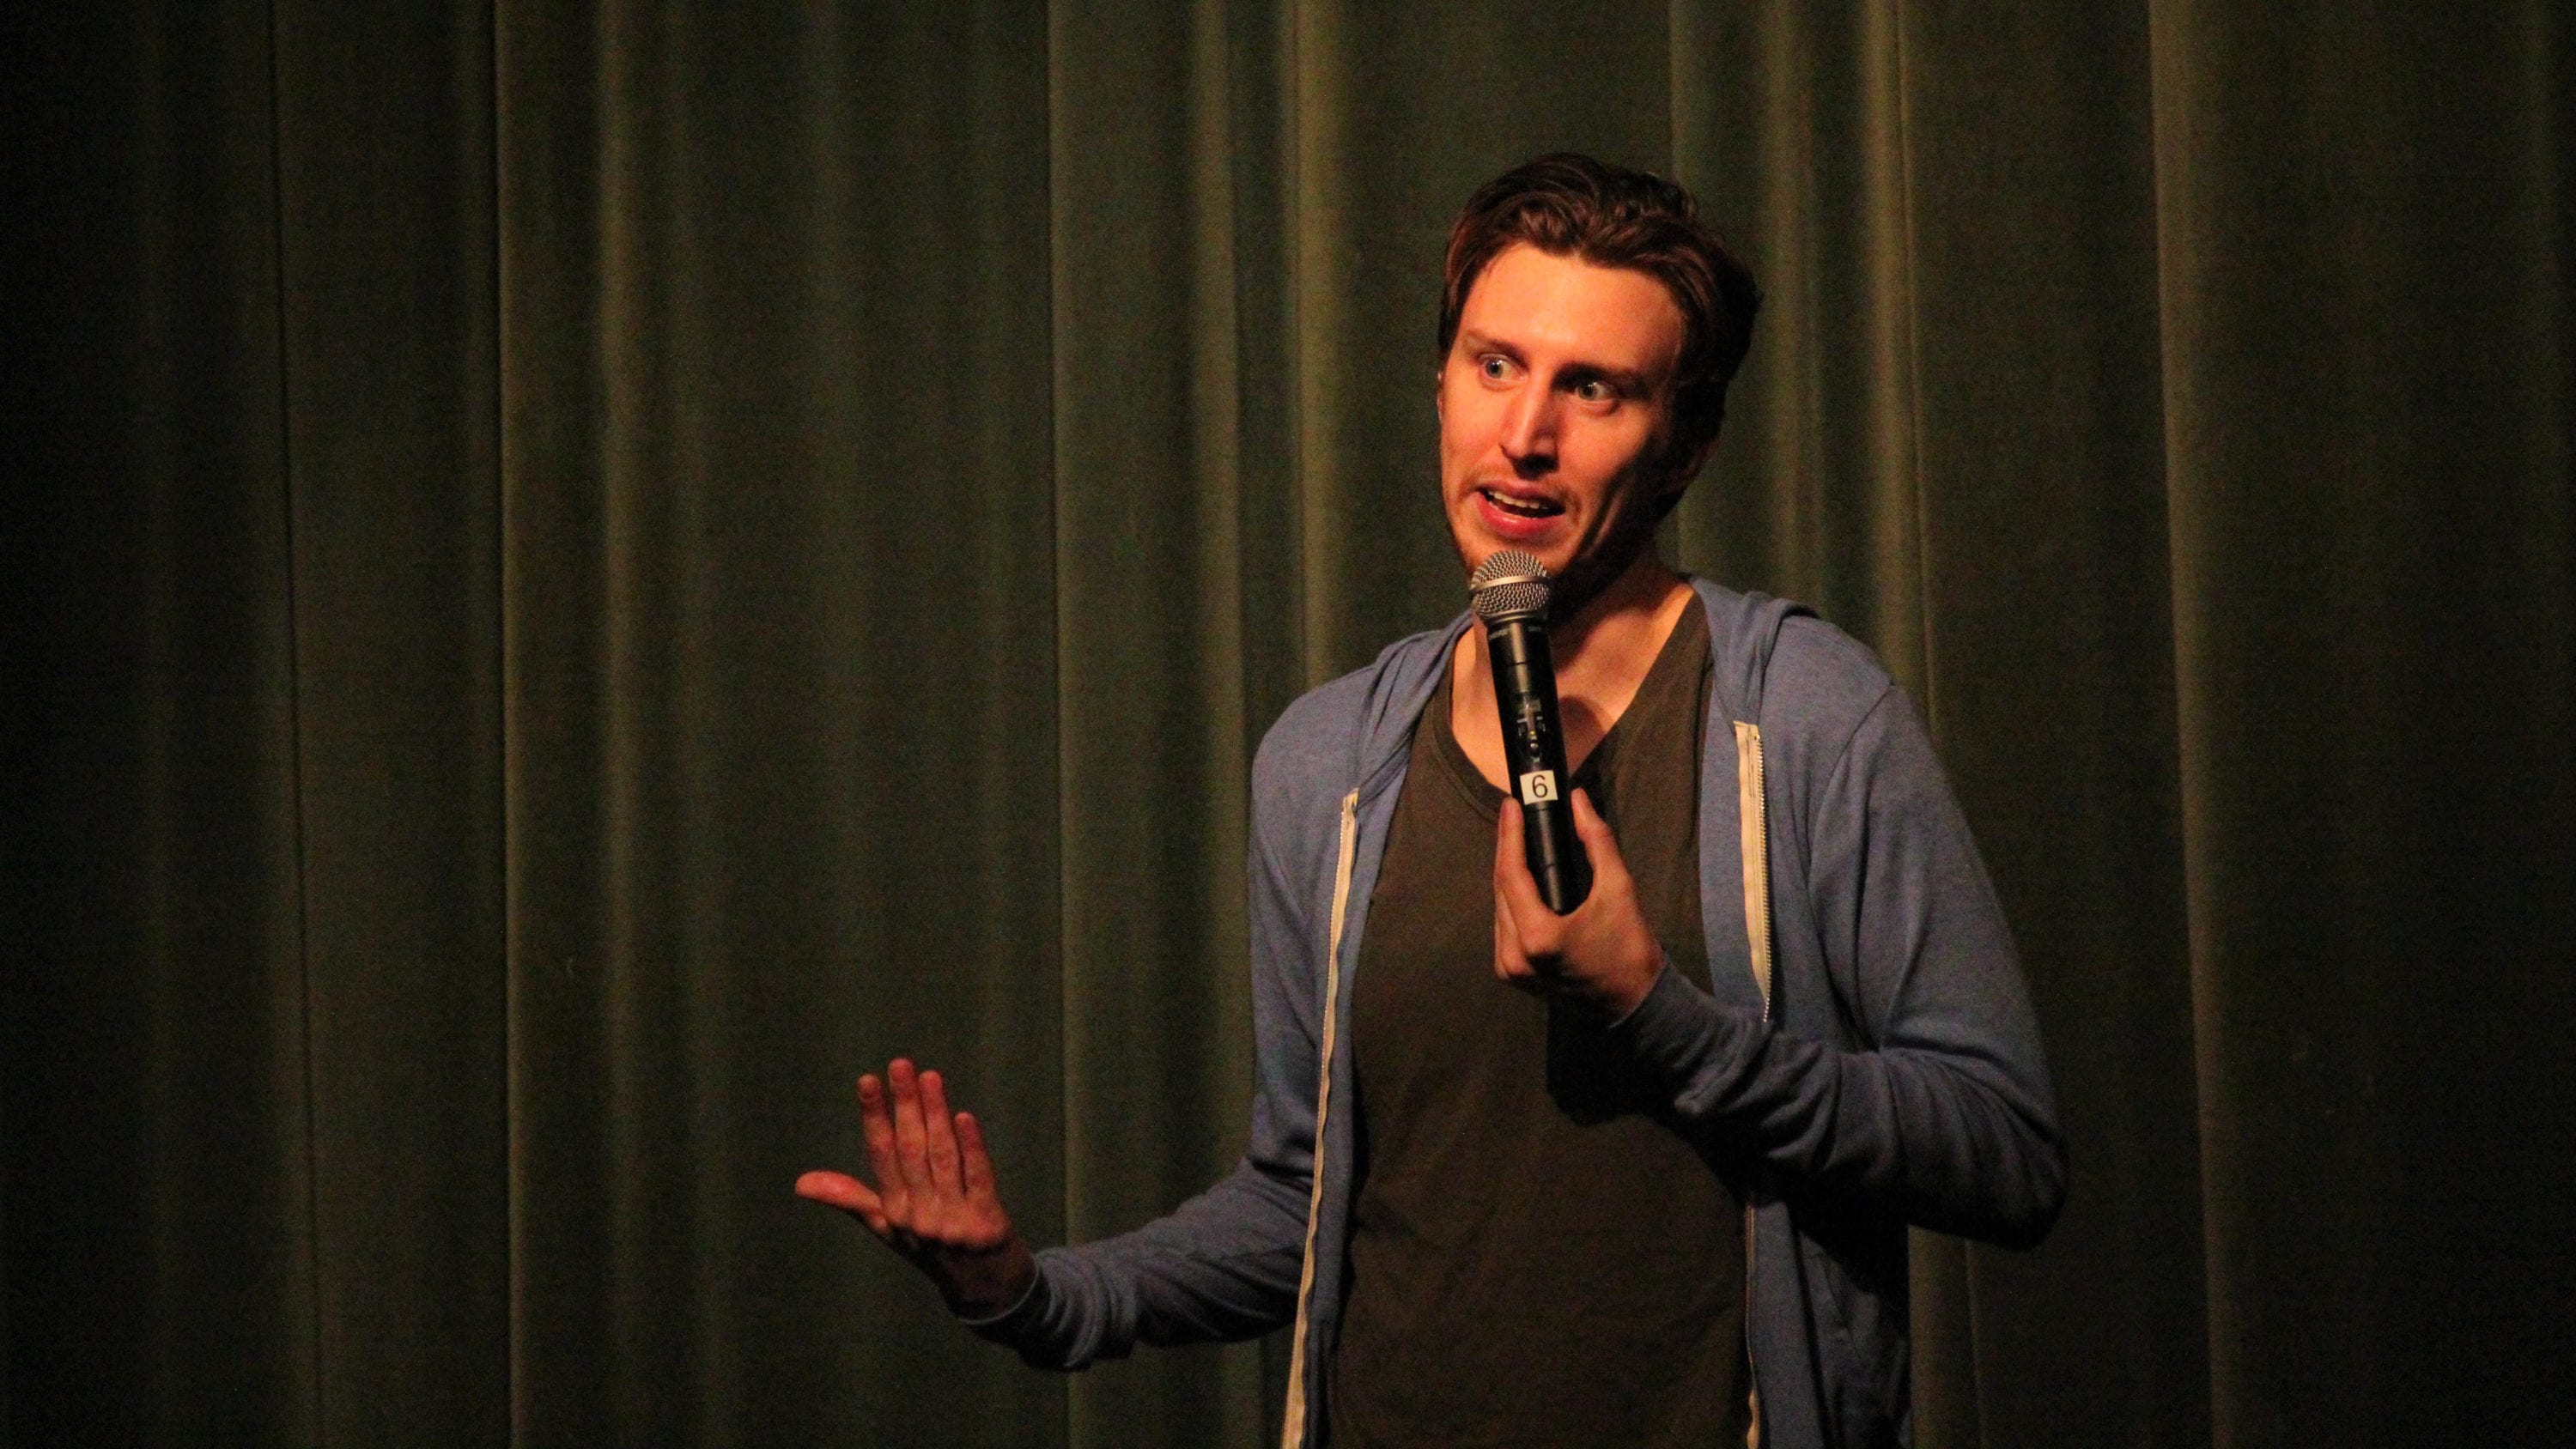 Jeff Scheen Shares Rise to Comedian Career | The Sower Newspaper